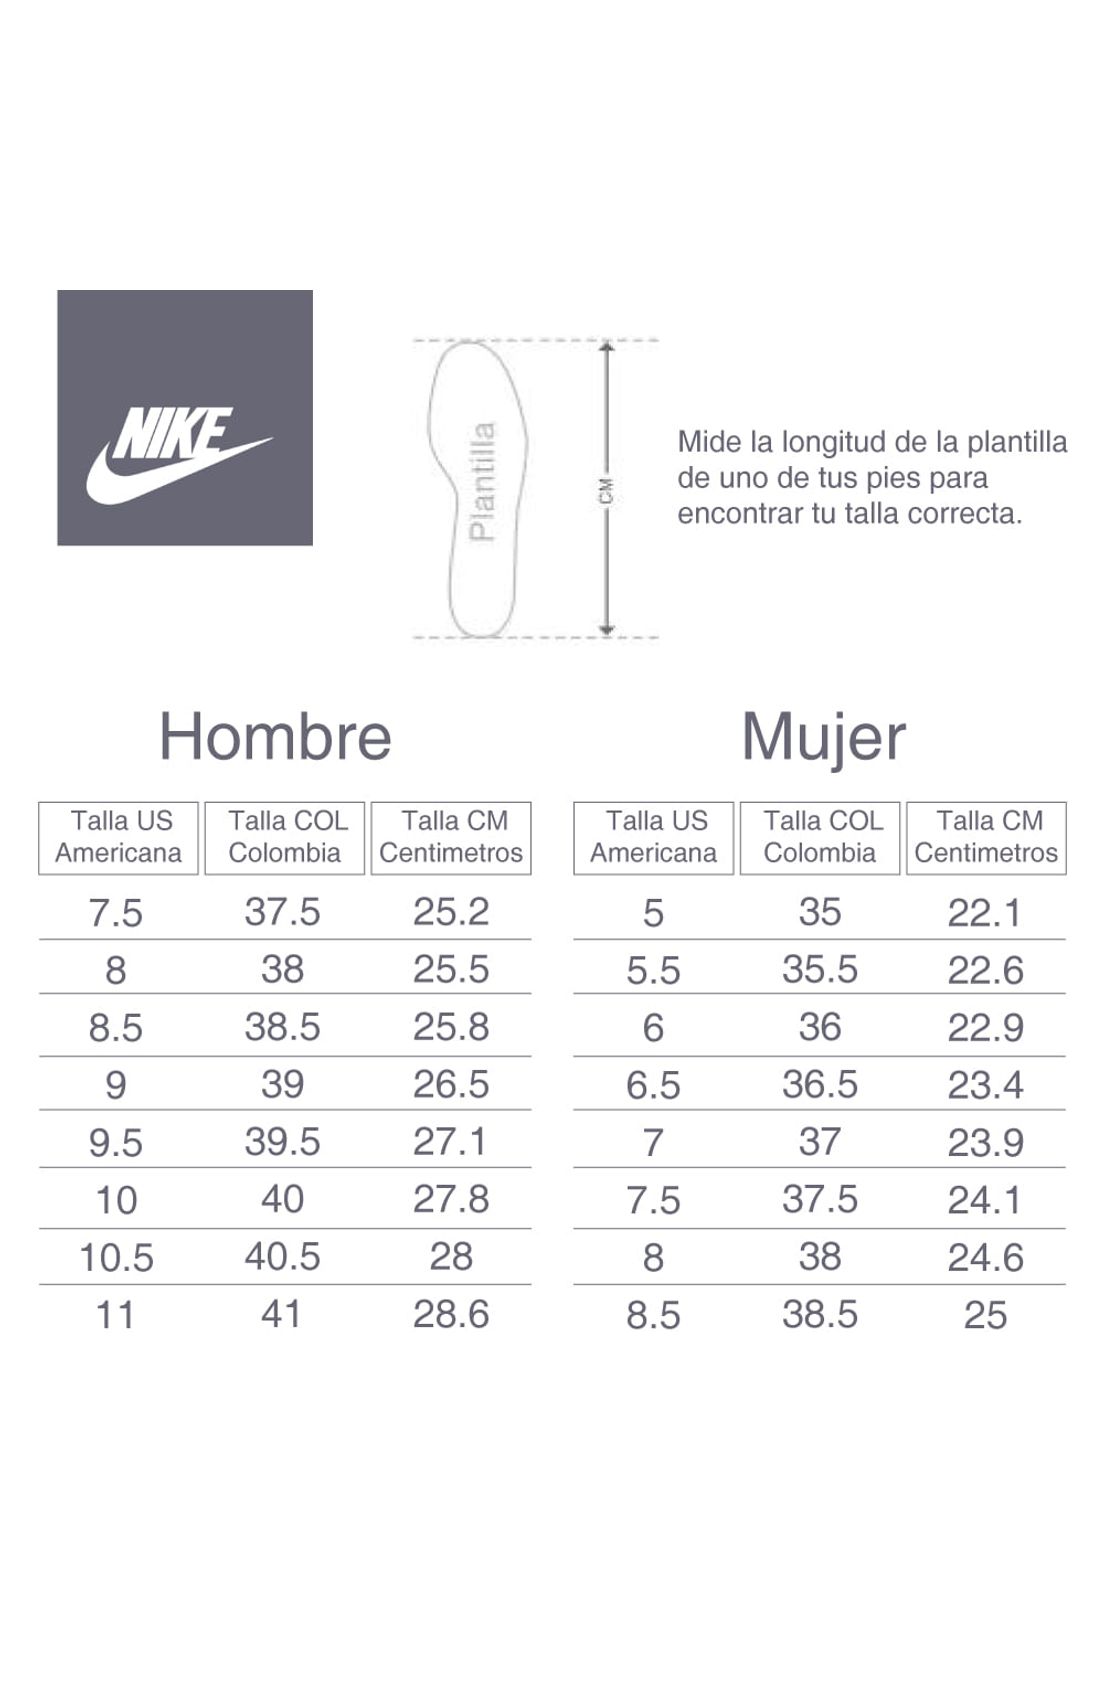 talla americana nike Today's OFF-70% Delivery